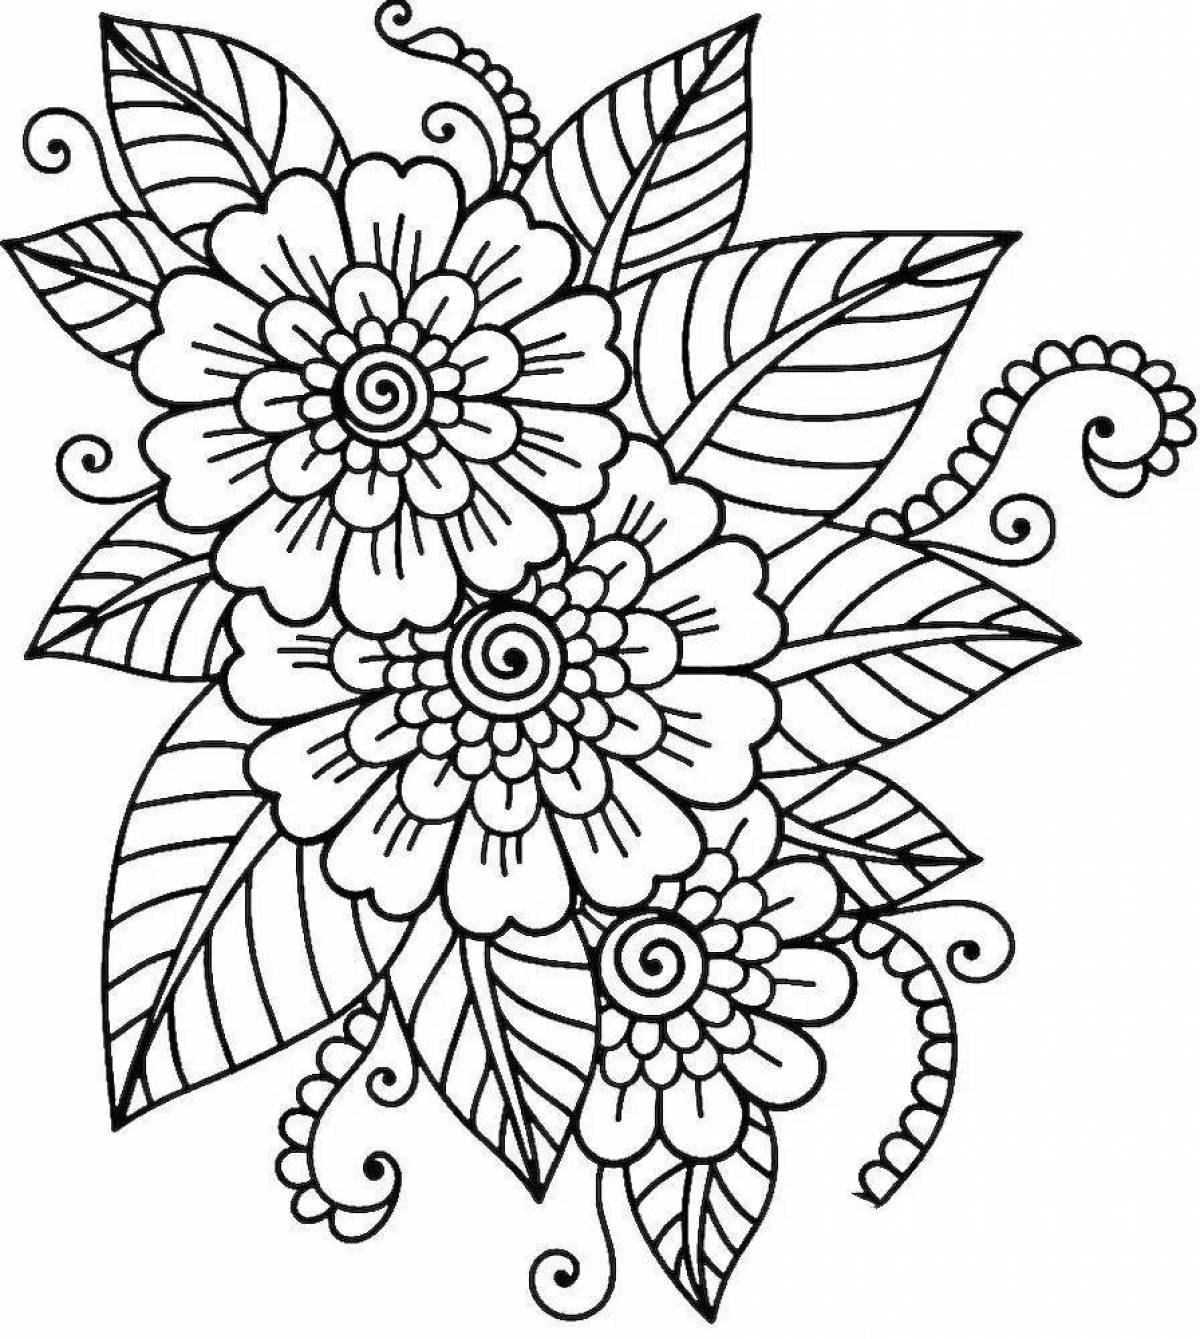 Flourishing flower coloring for girls complex